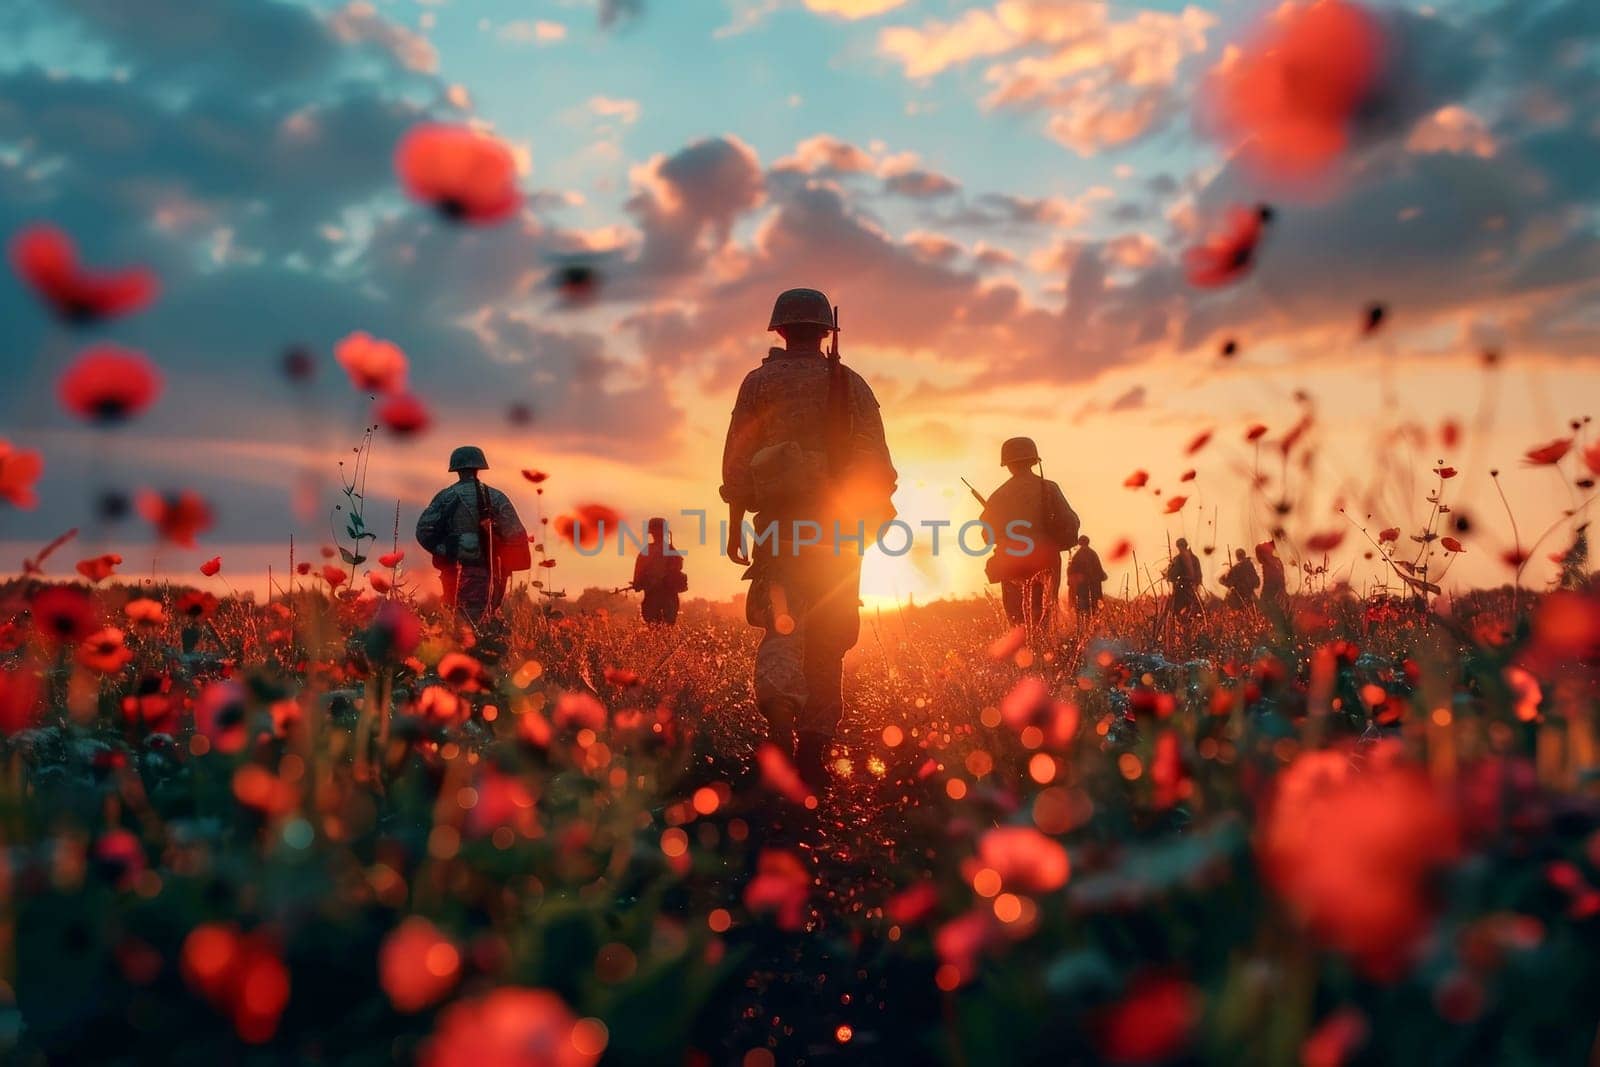 memorial day concept. A group of soldiers walking through a field of red poppies by matamnad